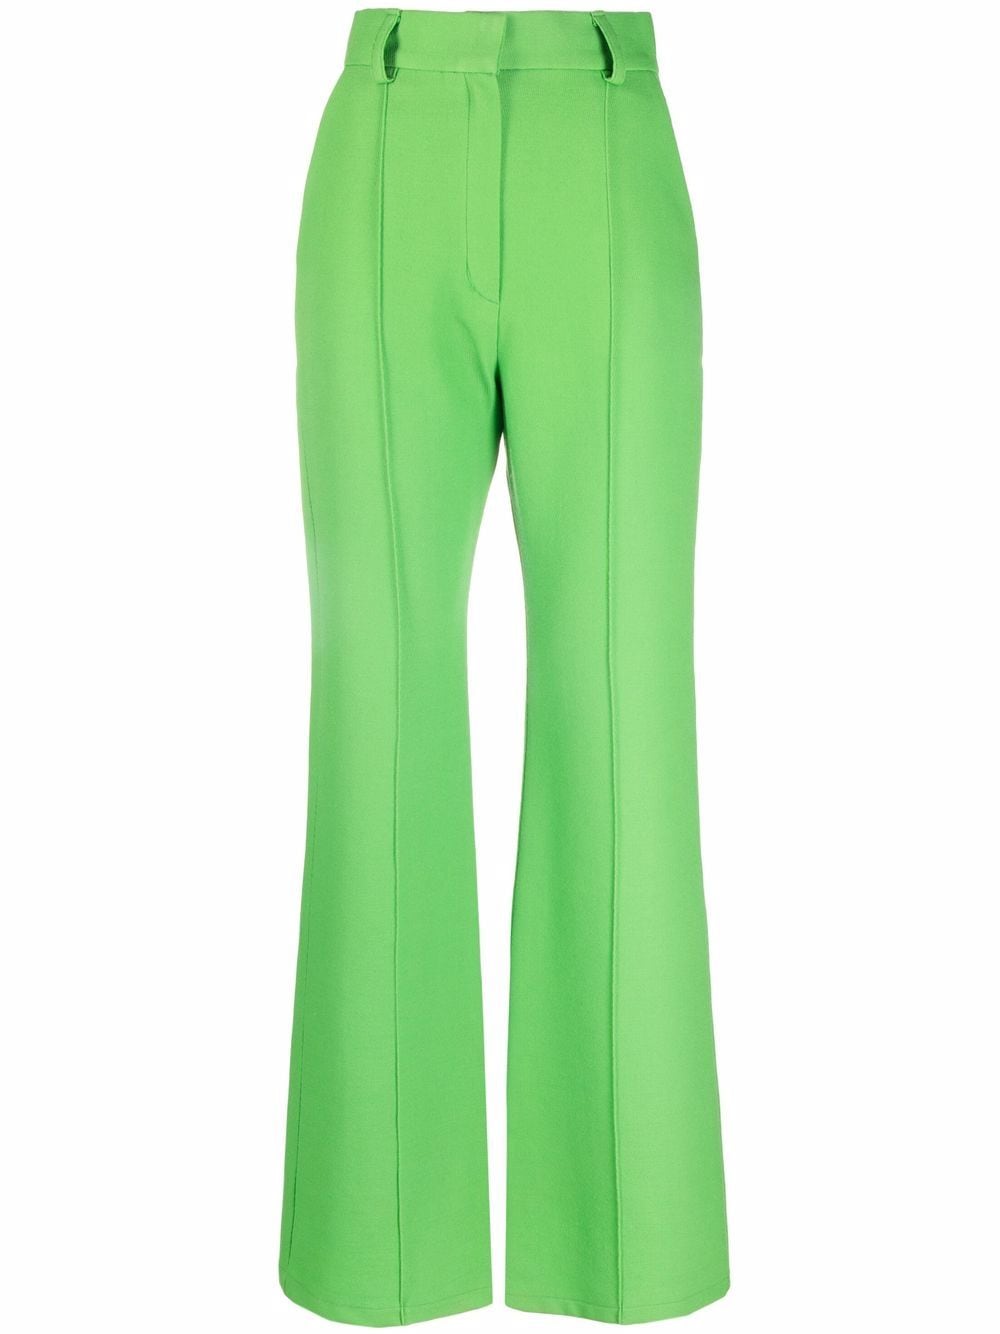 CONCEPTO high-waisted Flared Leg Trousers - Farfetch